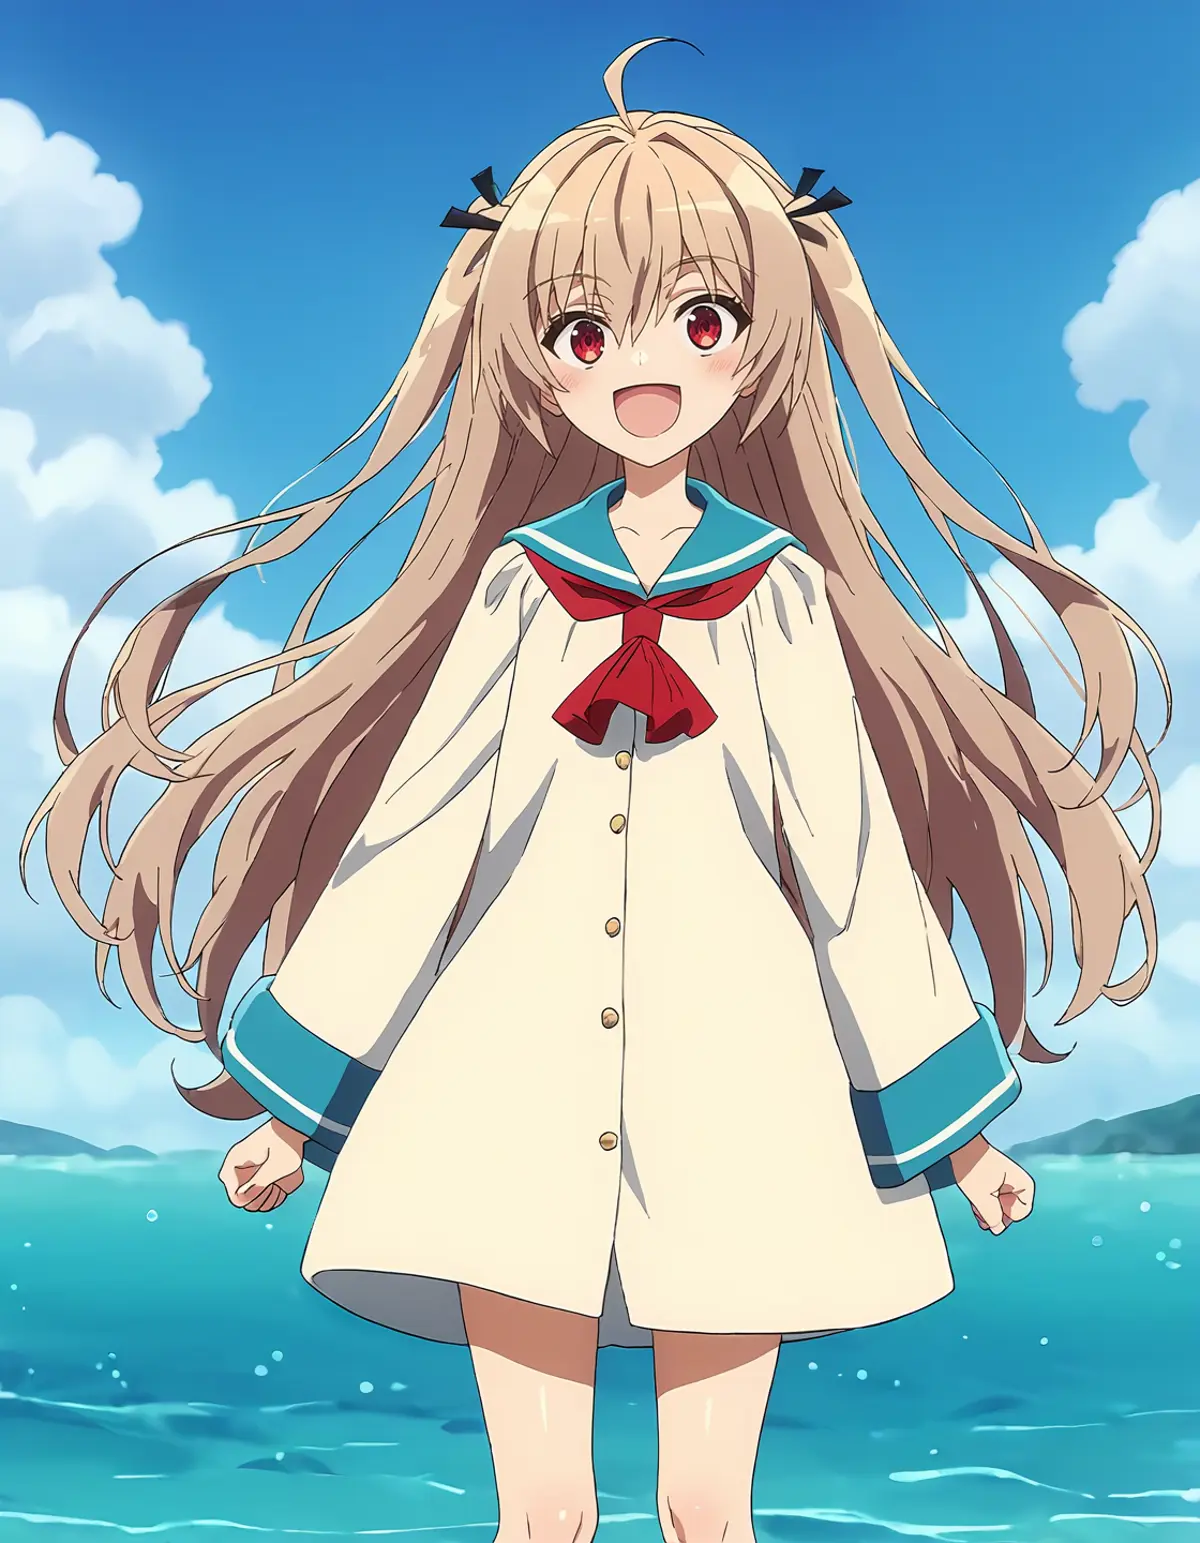 A girl standing in front of the sea, under a clear blue sky with a few clouds. She has long, flowing light brown hair adorned with two small black ribbons tied near the top of her head. She is wearing a white dress with blue trim, and a red bow at the collar. Her expression is cheerful, with her mouth open as if she is speaking or laughing, and her eyes are wide open looking directly at the viewer. 